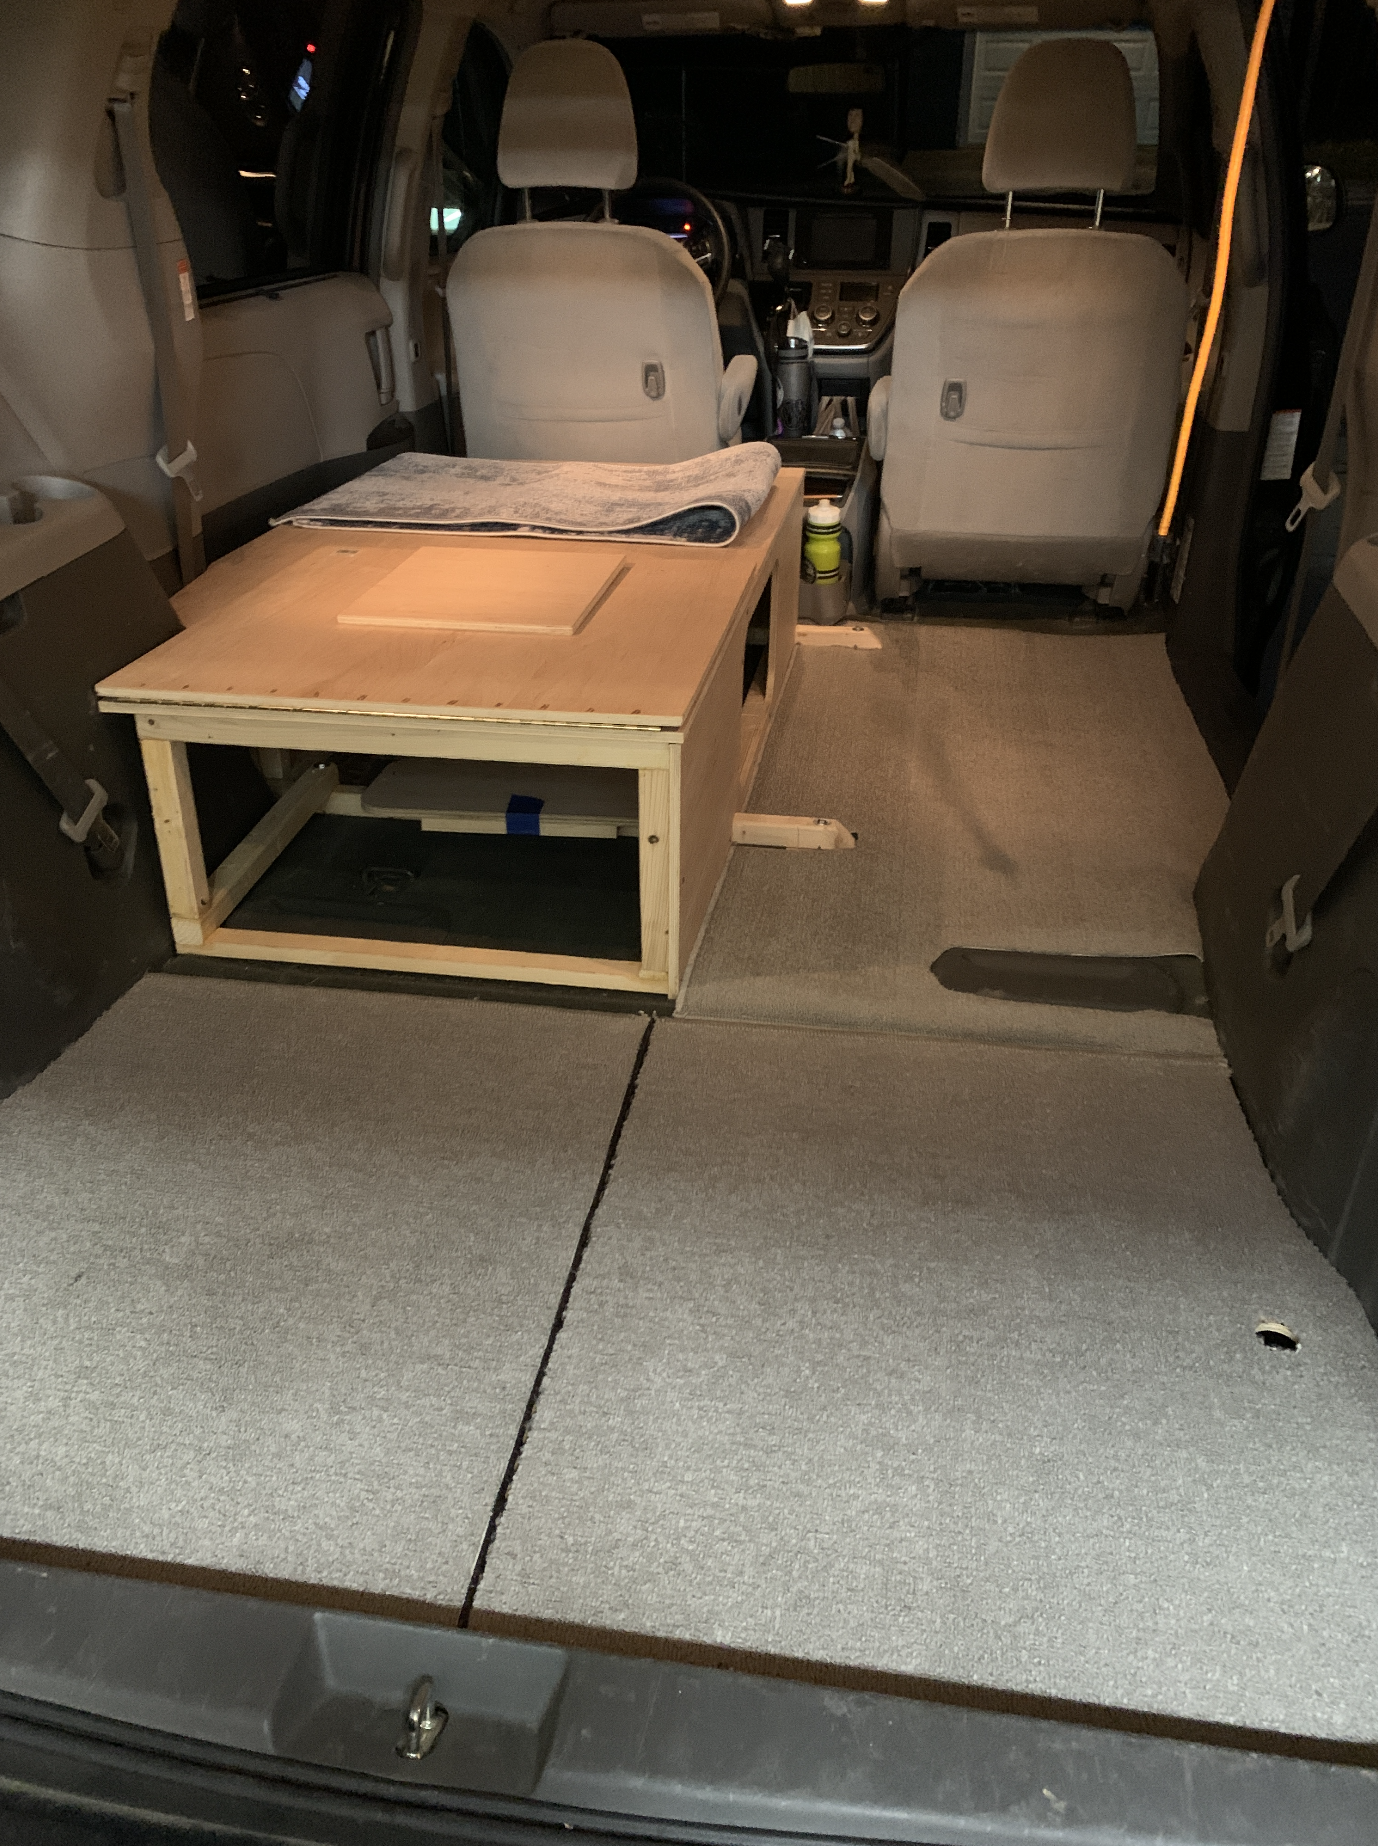 Interior of the van after removing the seats and creating a sleeping platform with storage.